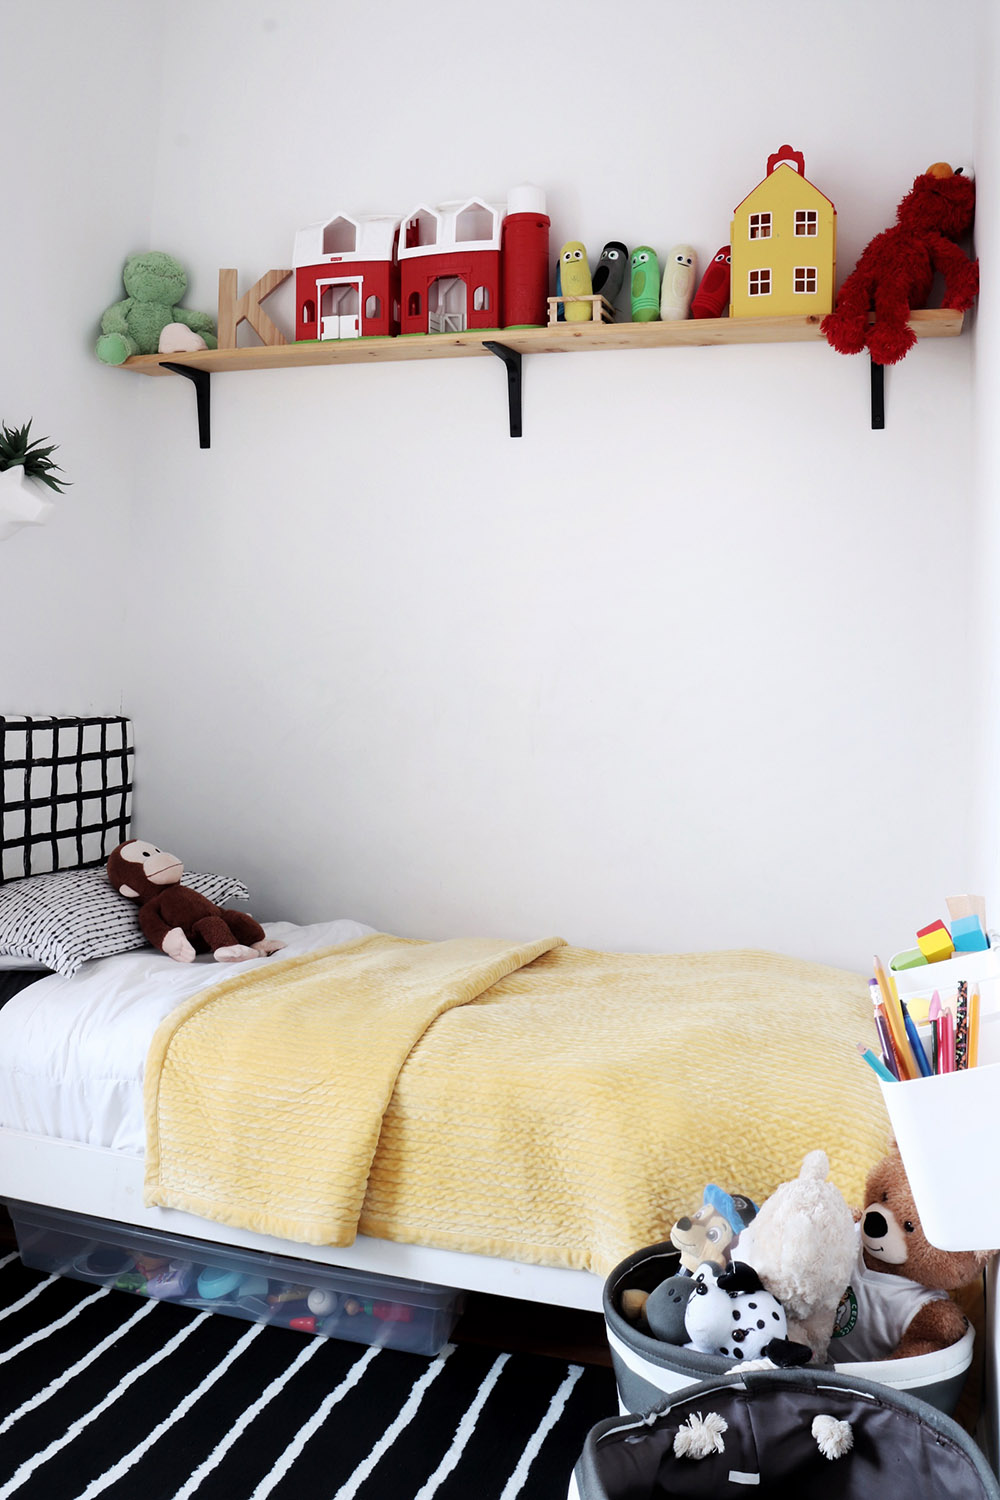 A kid's bedroom set with toys on a shelf